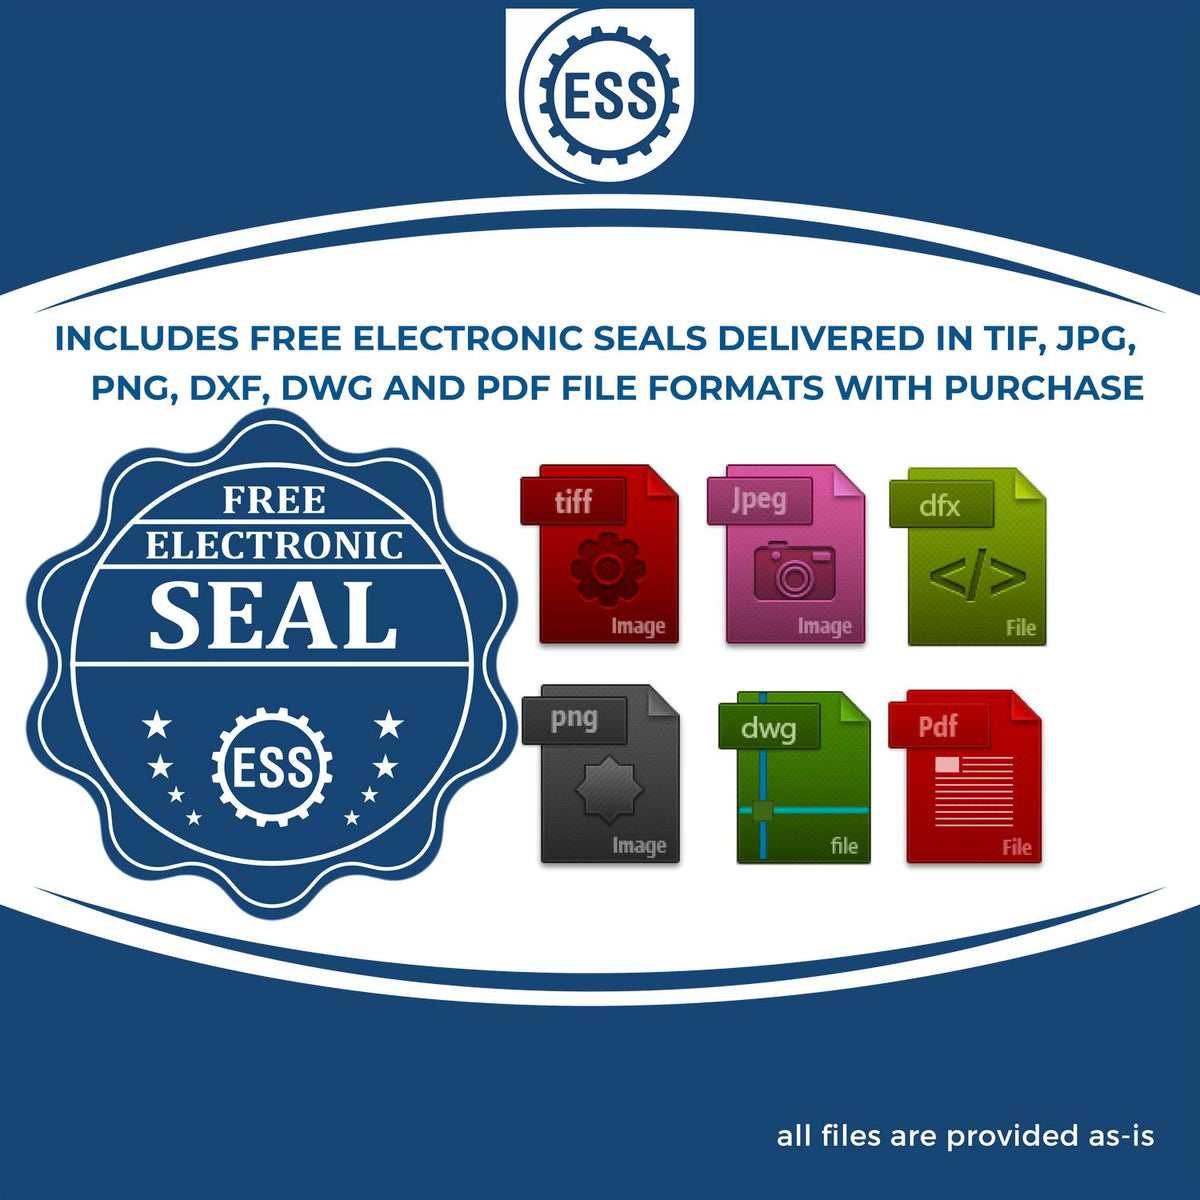 An infographic for the free electronic seal for the Utah Professional Geologist Seal Stamp illustrating the different file type icons such as DXF, DWG, TIF, JPG and PNG.